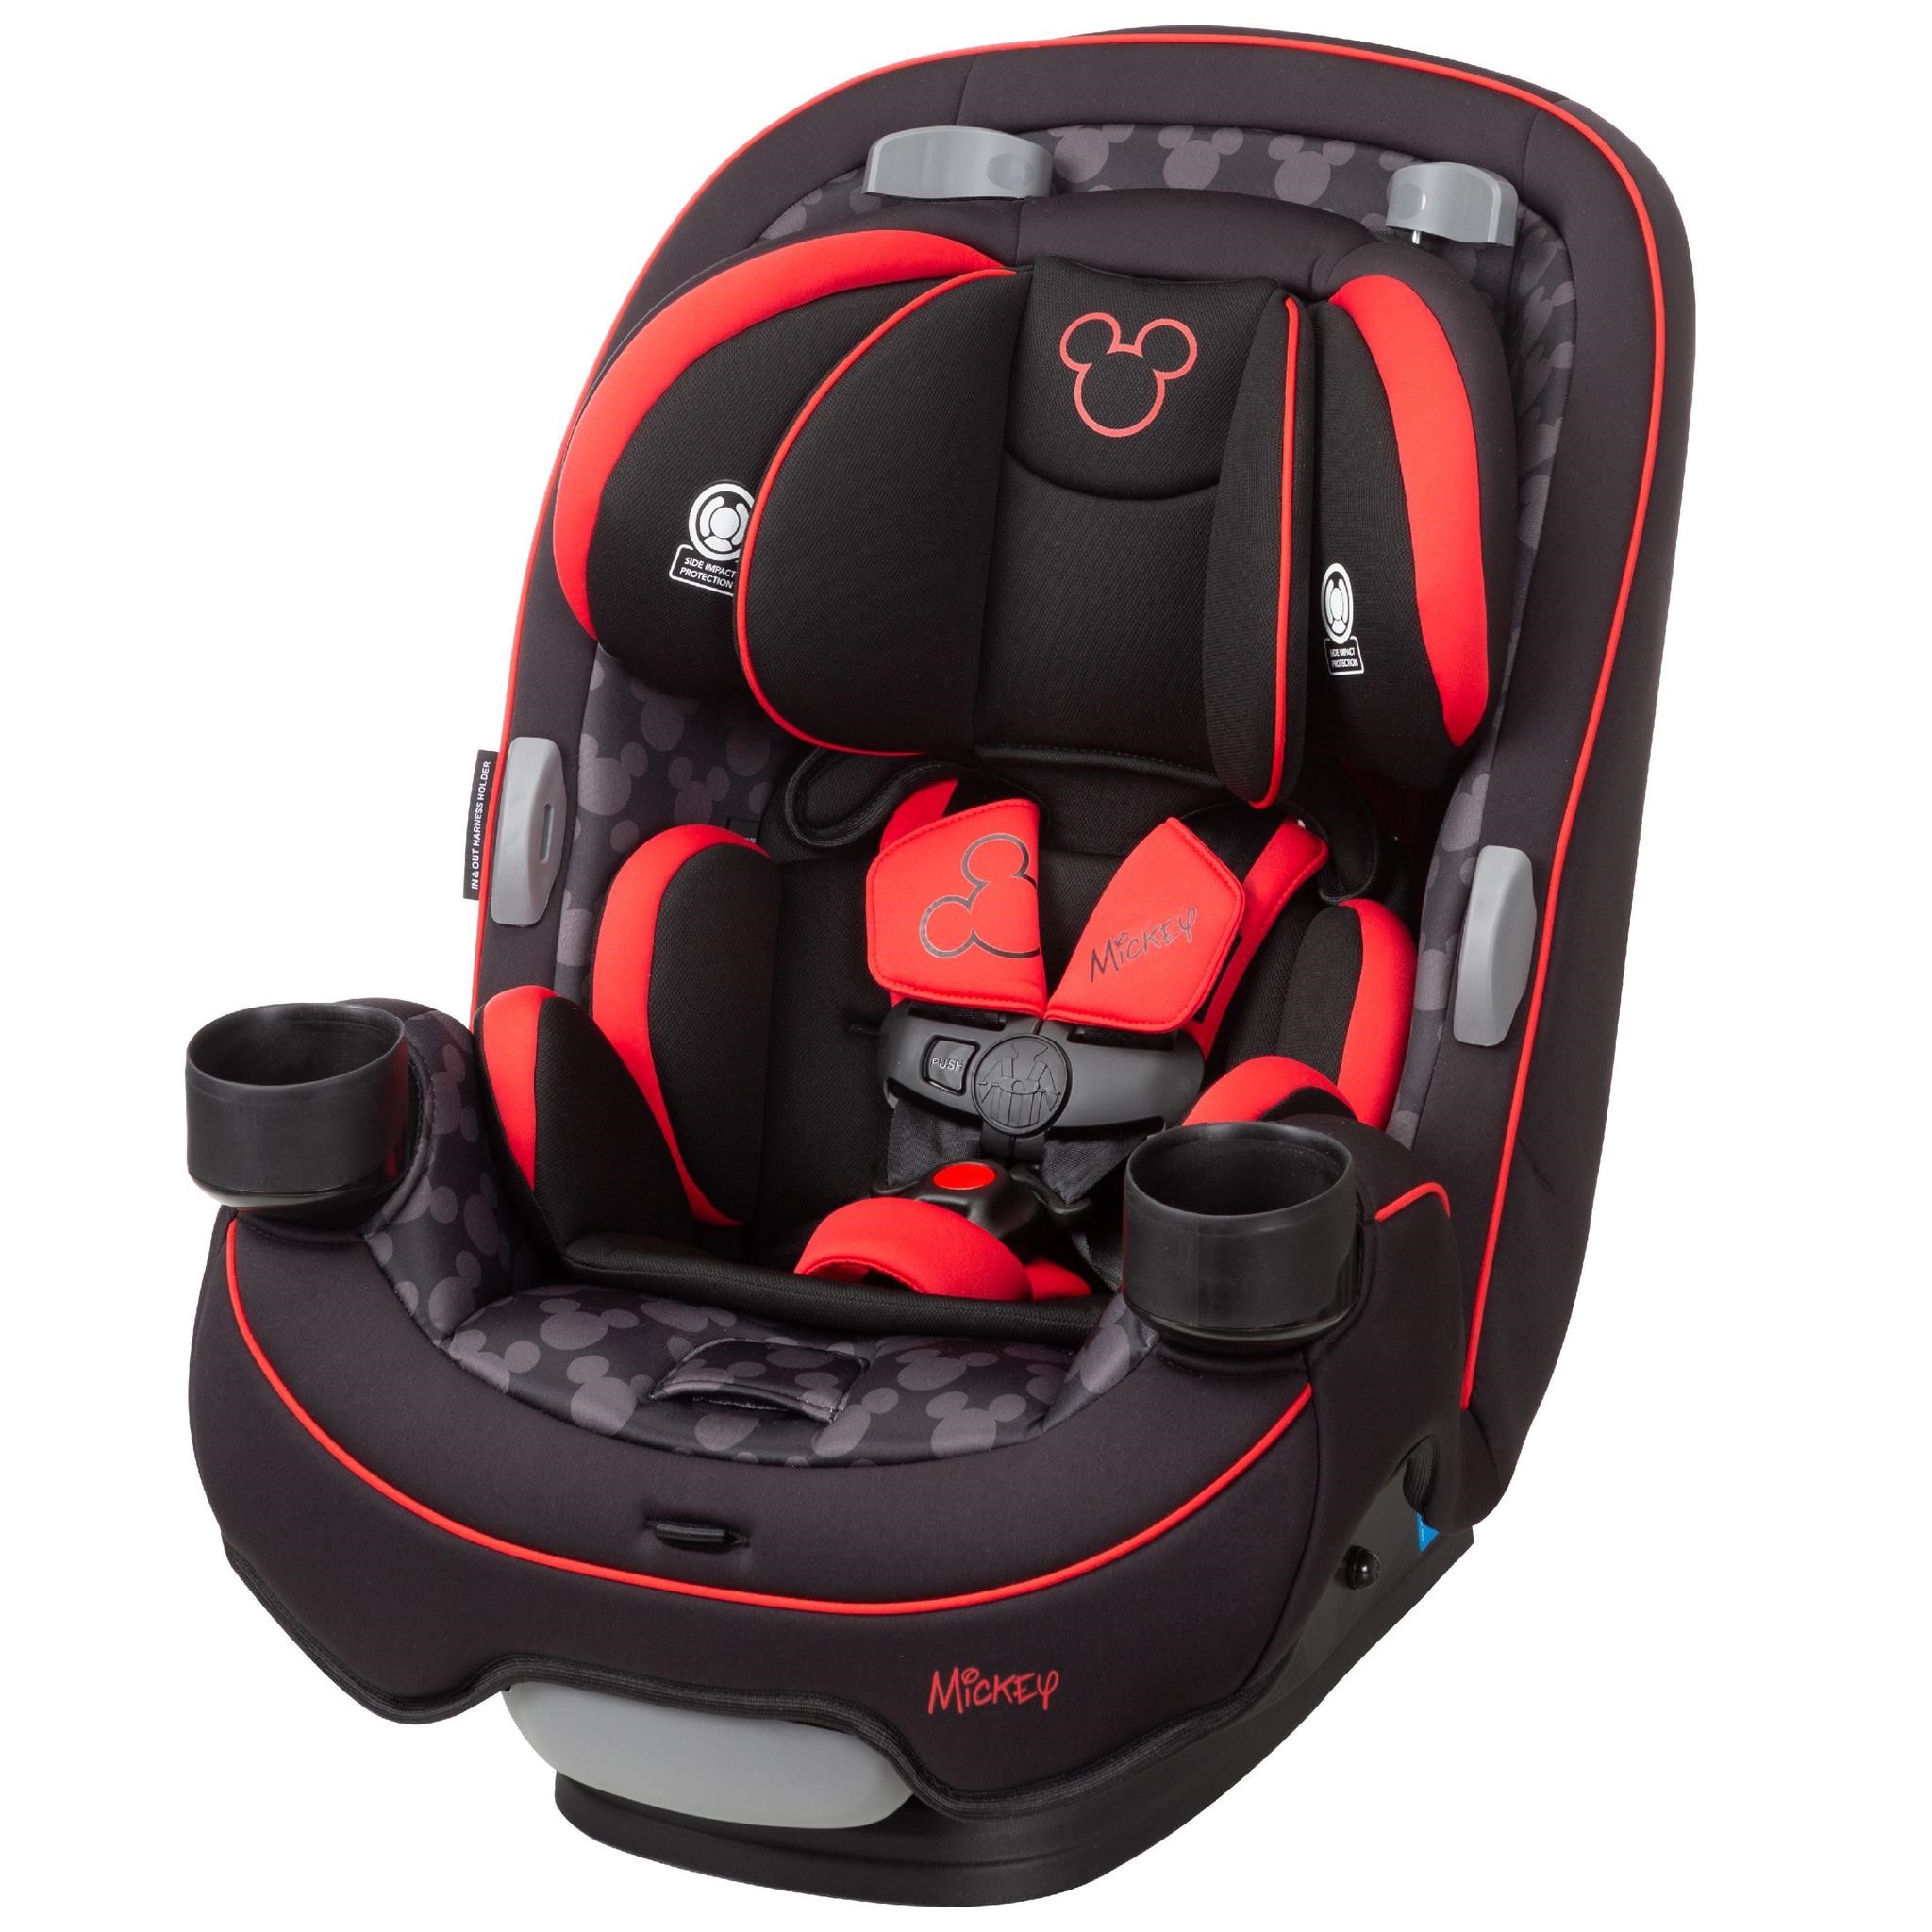 Disney Baby Grow and Go Convertible Car Seat $193